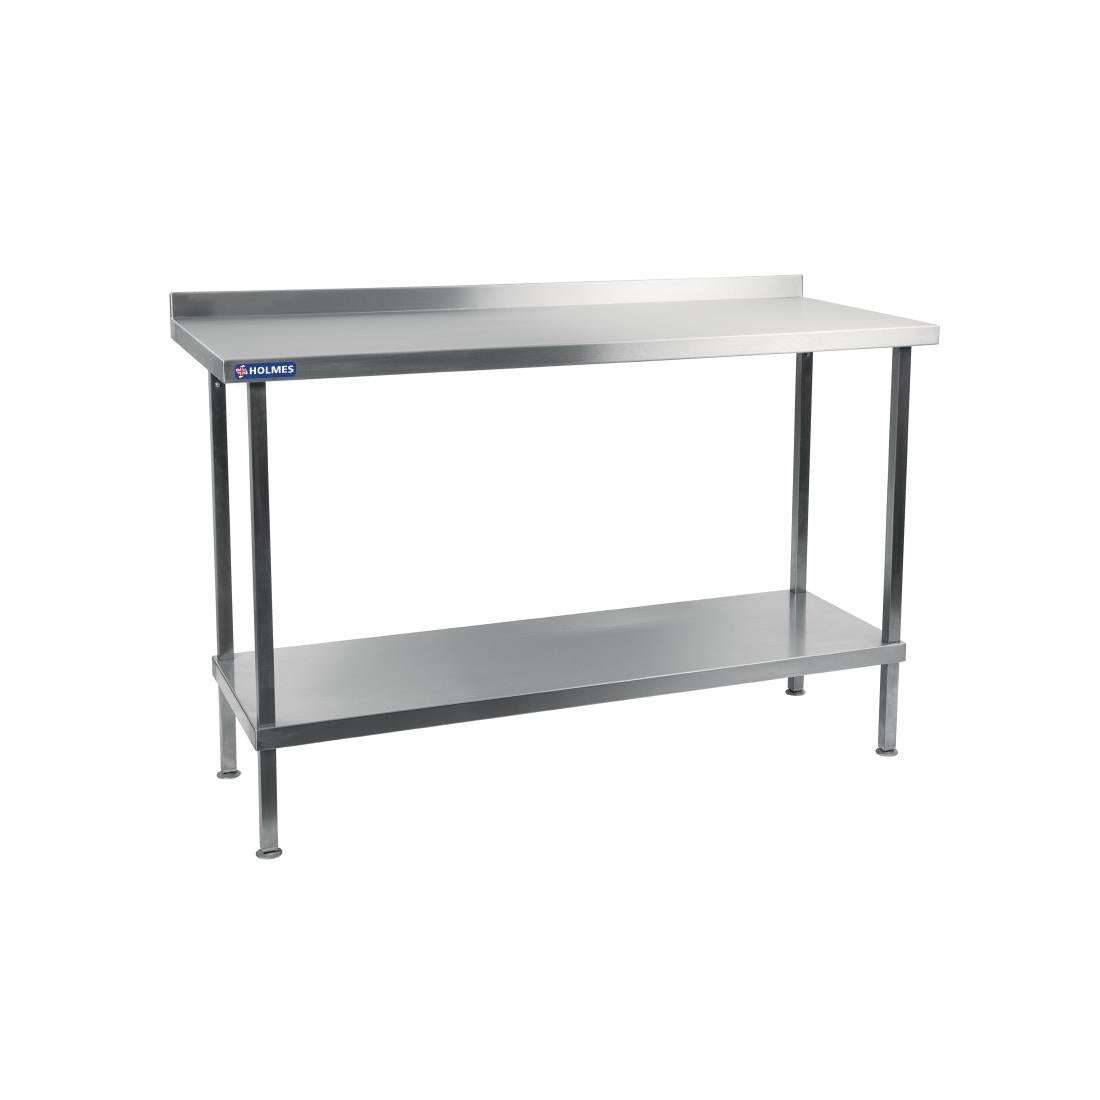 DR035 Holmes Stainless Steel Wall Table 900mm JD Catering Equipment Solutions Ltd